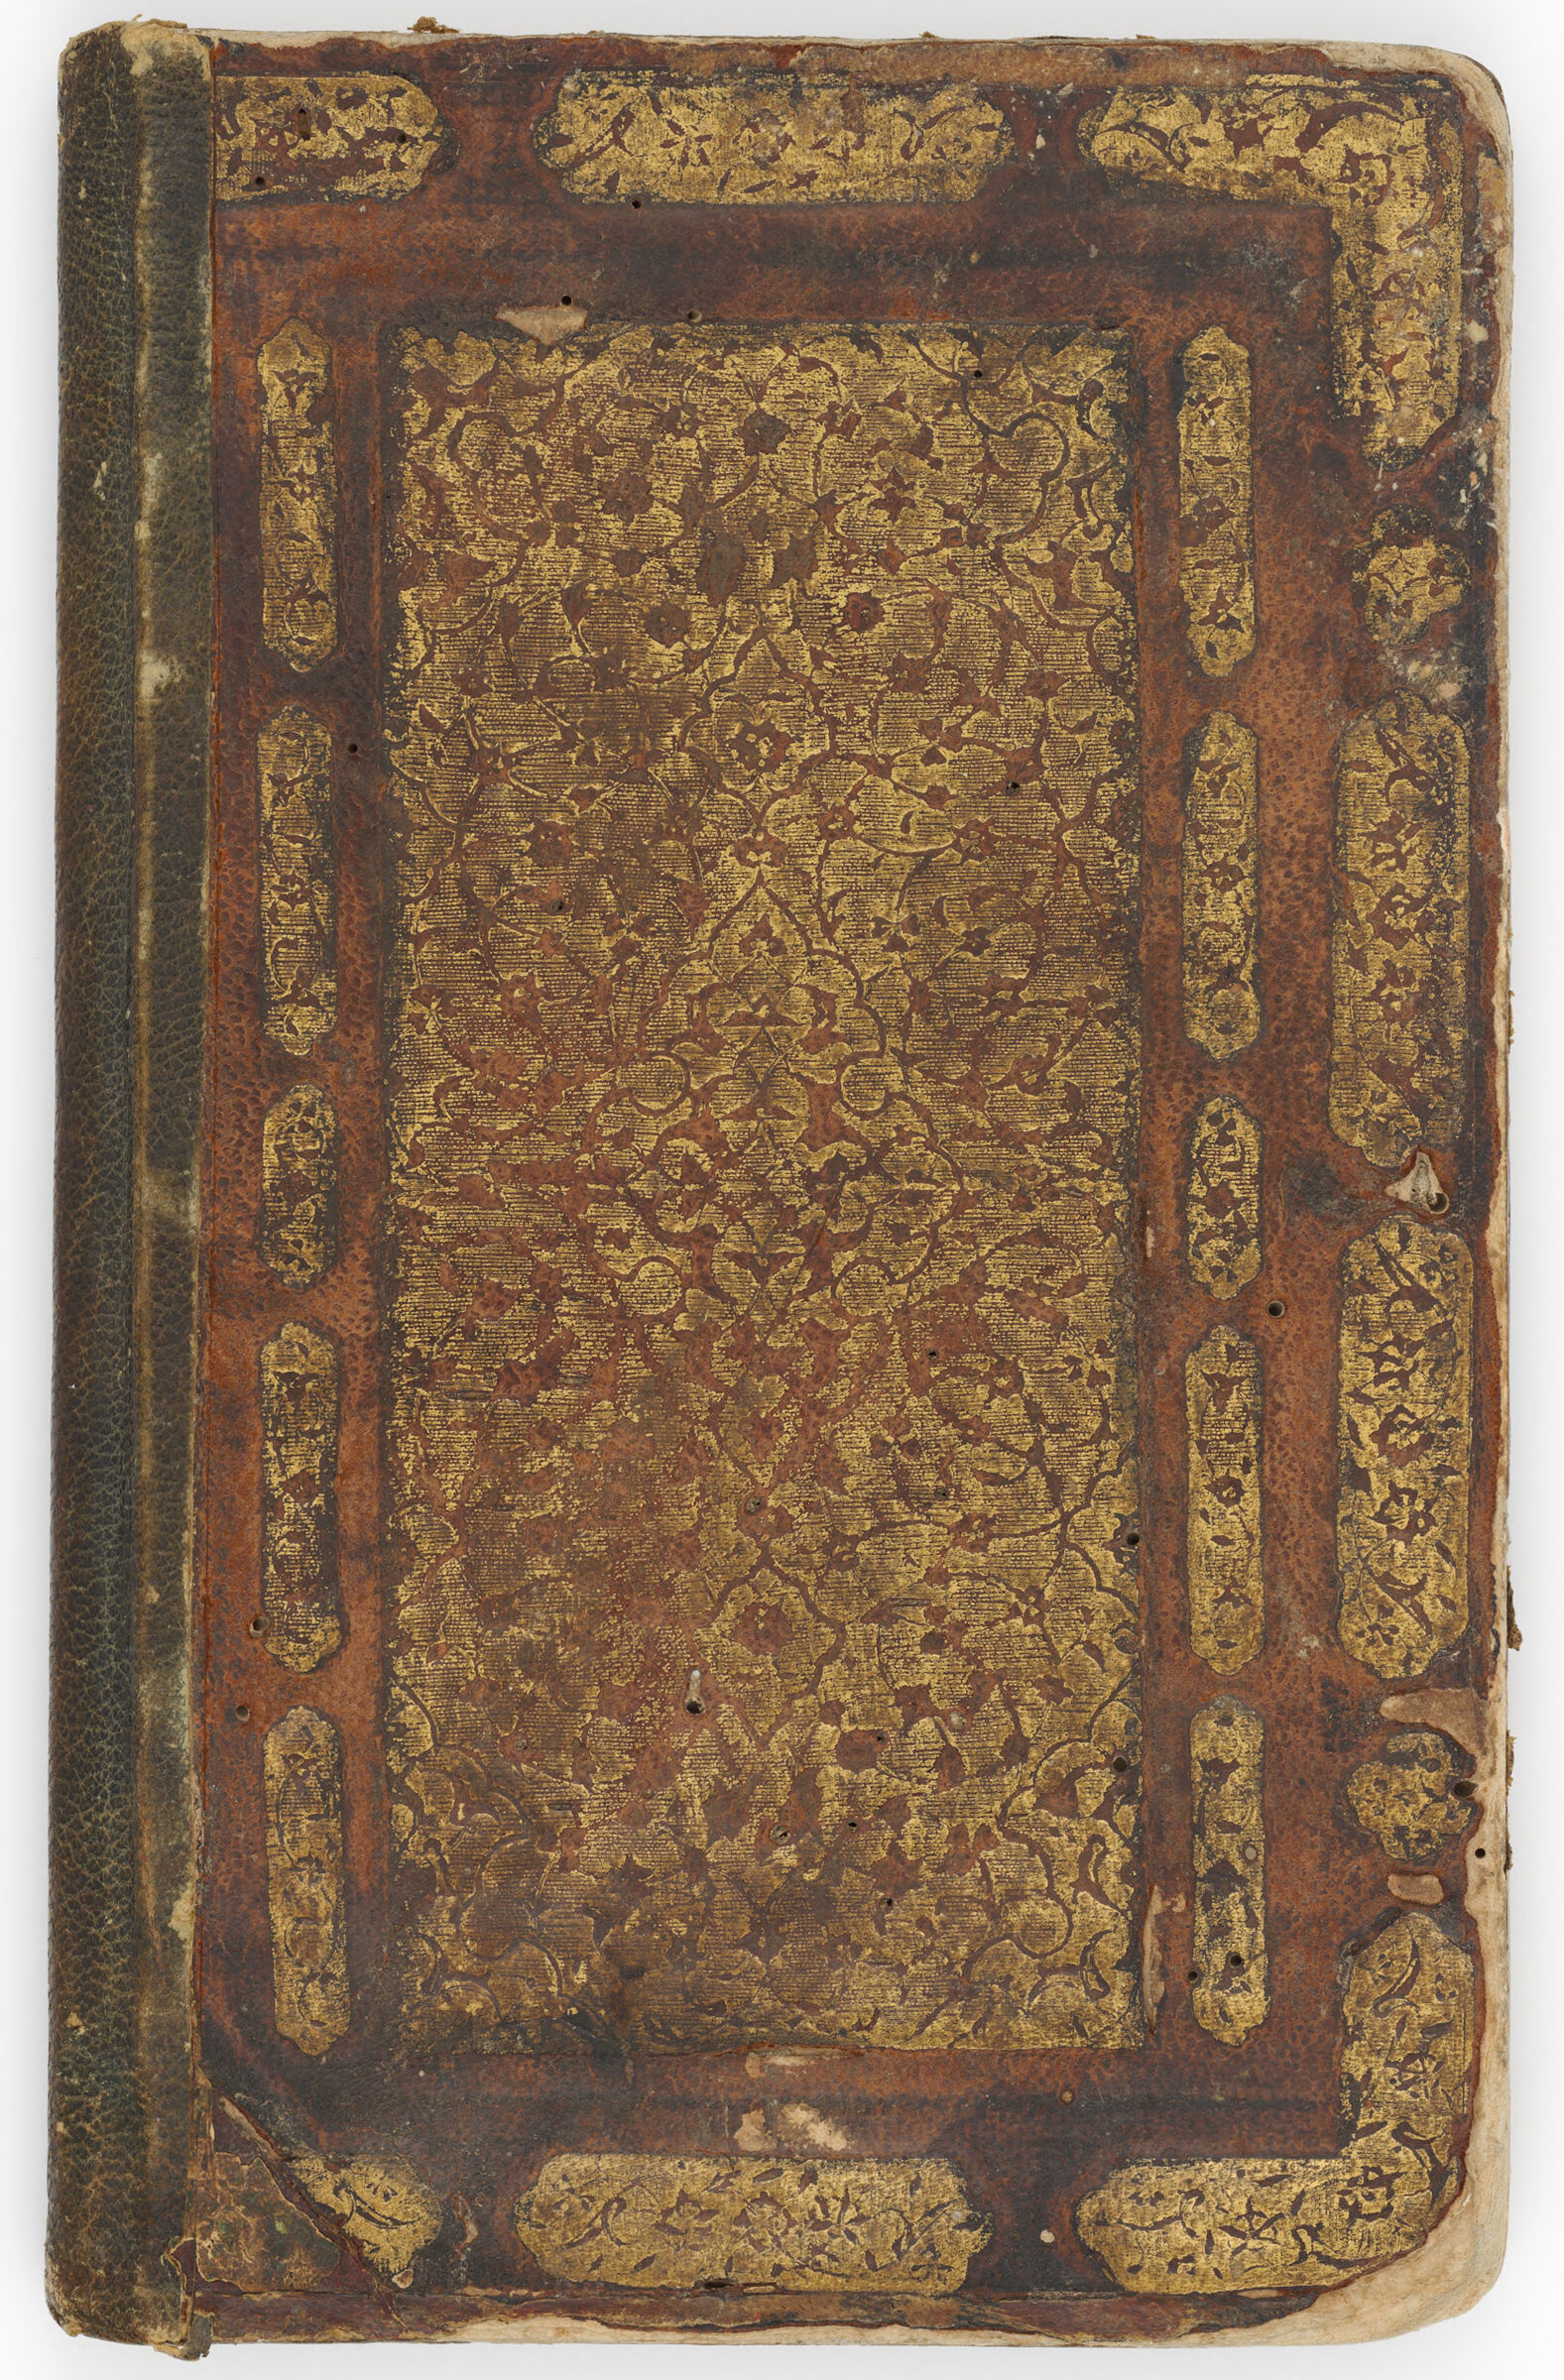 Manuscript Of The Muntakhab-I Bustan (Selections From The Bustan By Sa`di)